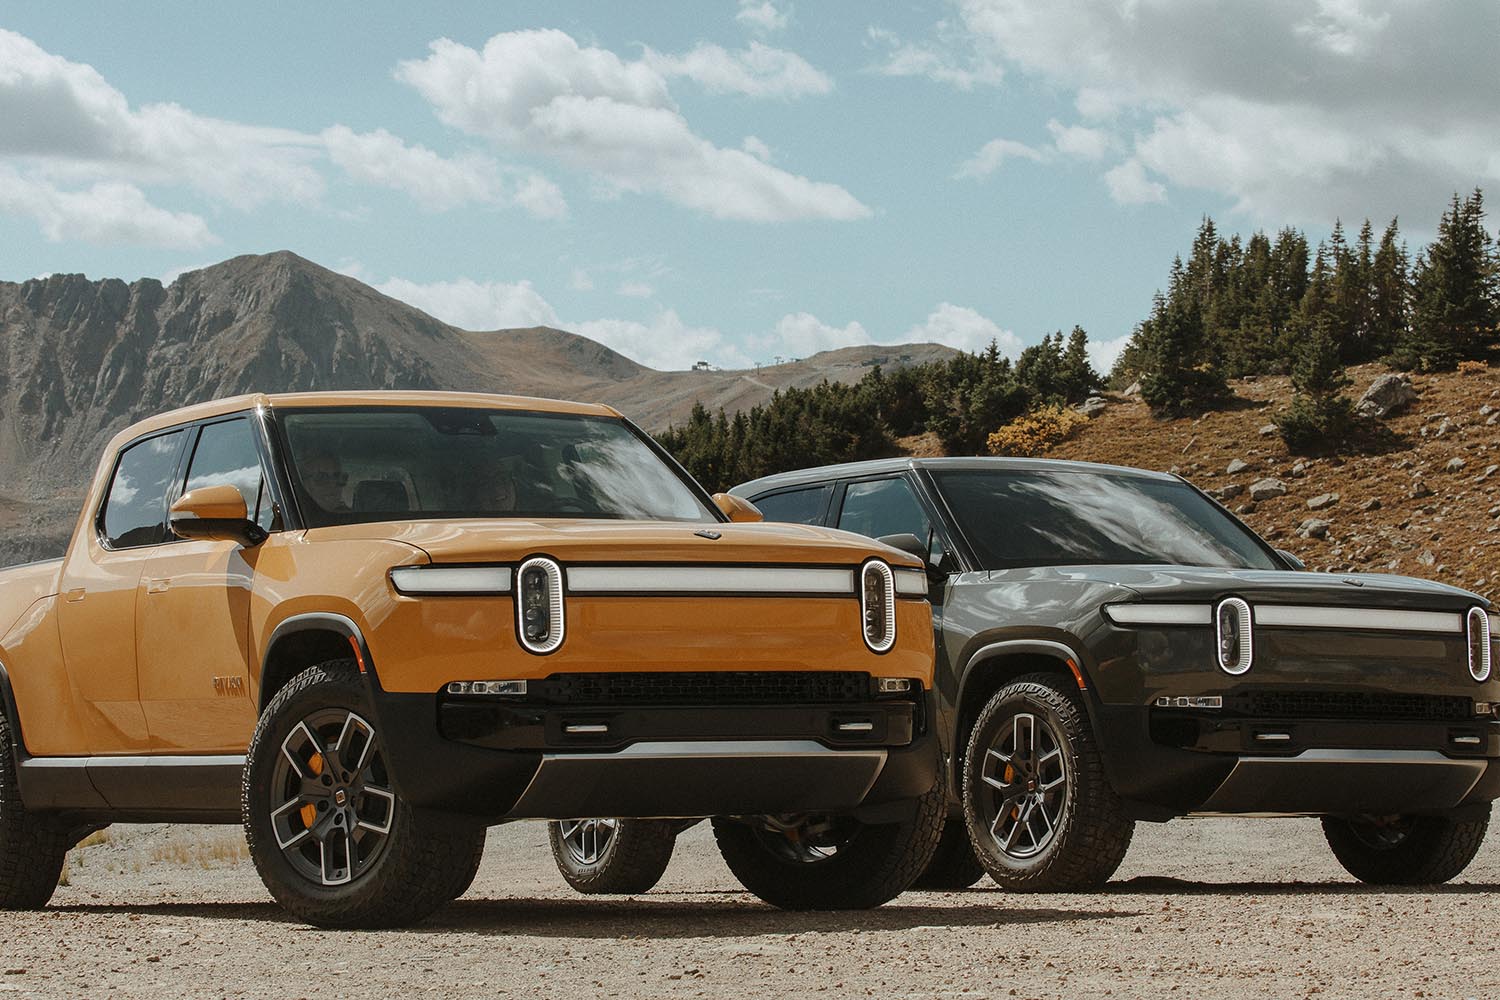 Two Rivian R1T trucks in orange and green parked on concrete